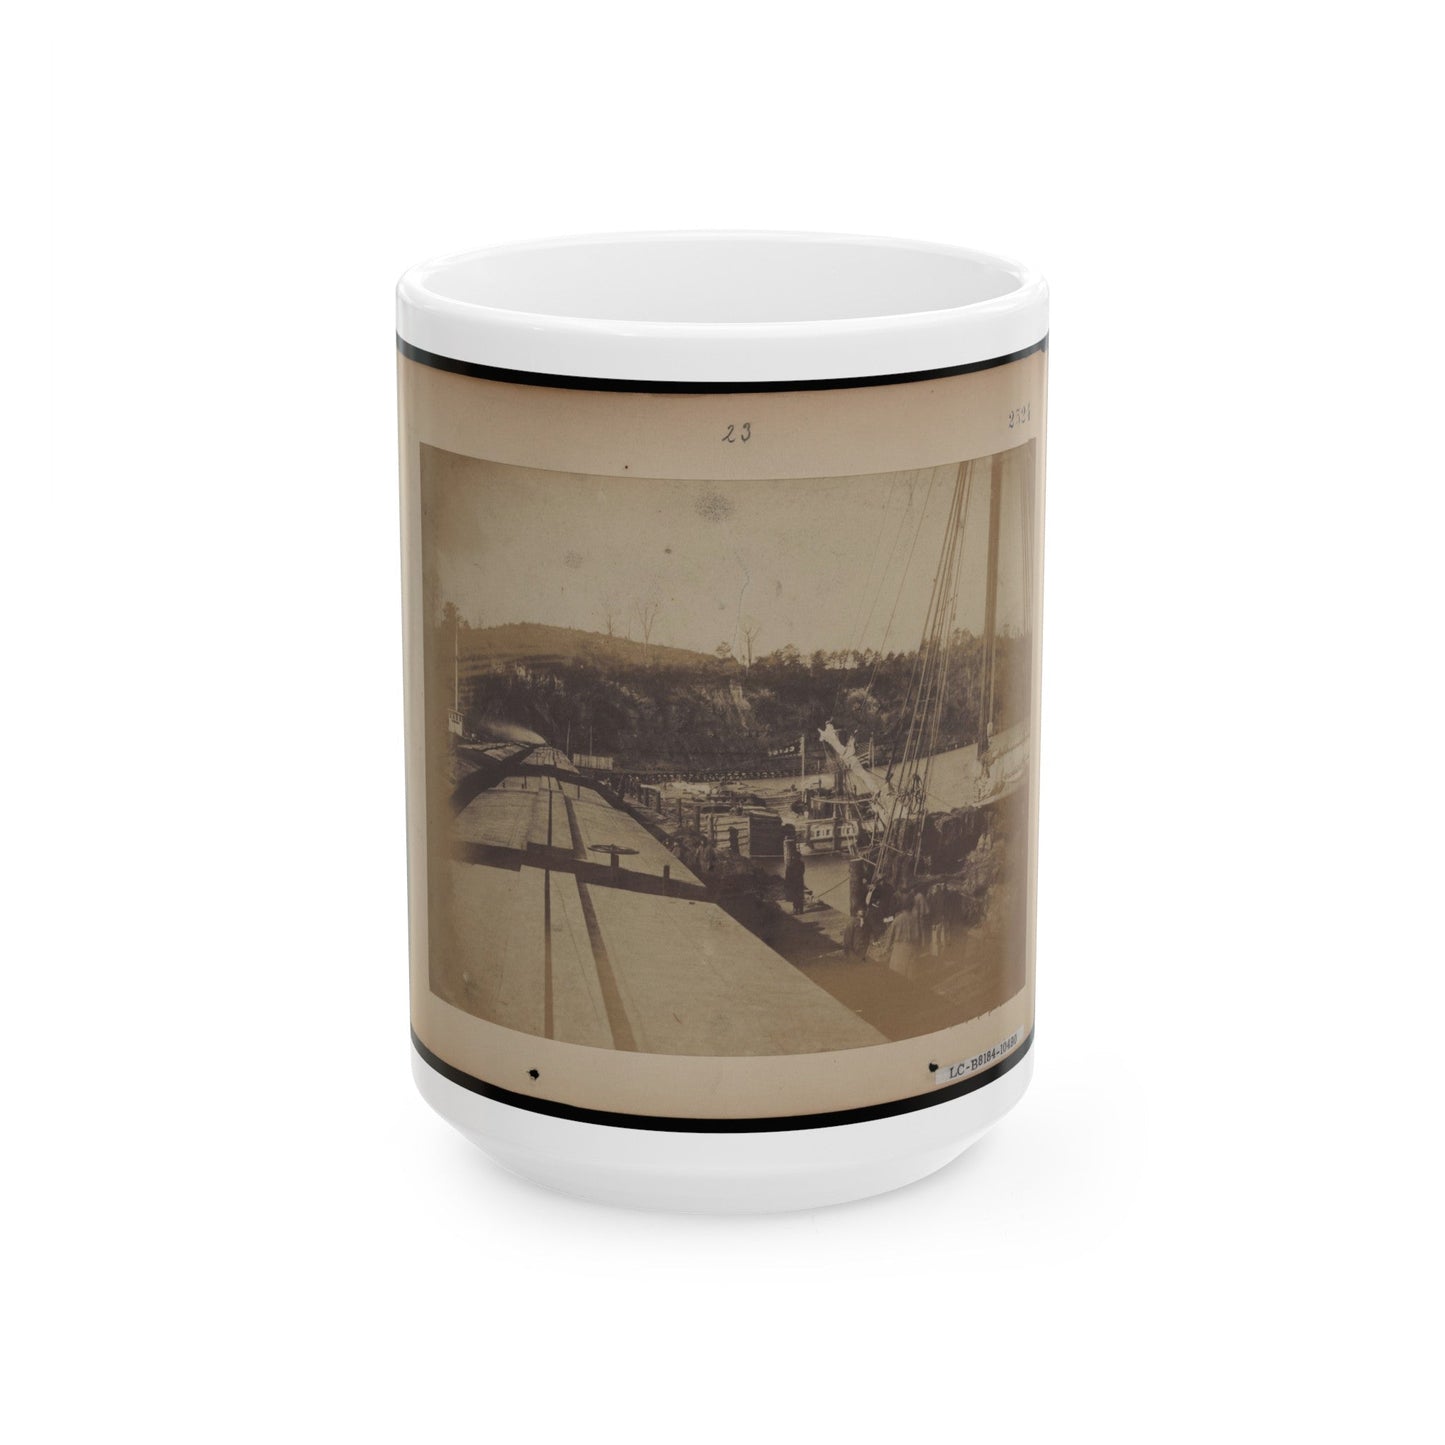 View From The Top Of A Car On The Extreme End Of The Burnside Wharf Looking Towards Shore (U.S. Civil War) White Coffee Mug